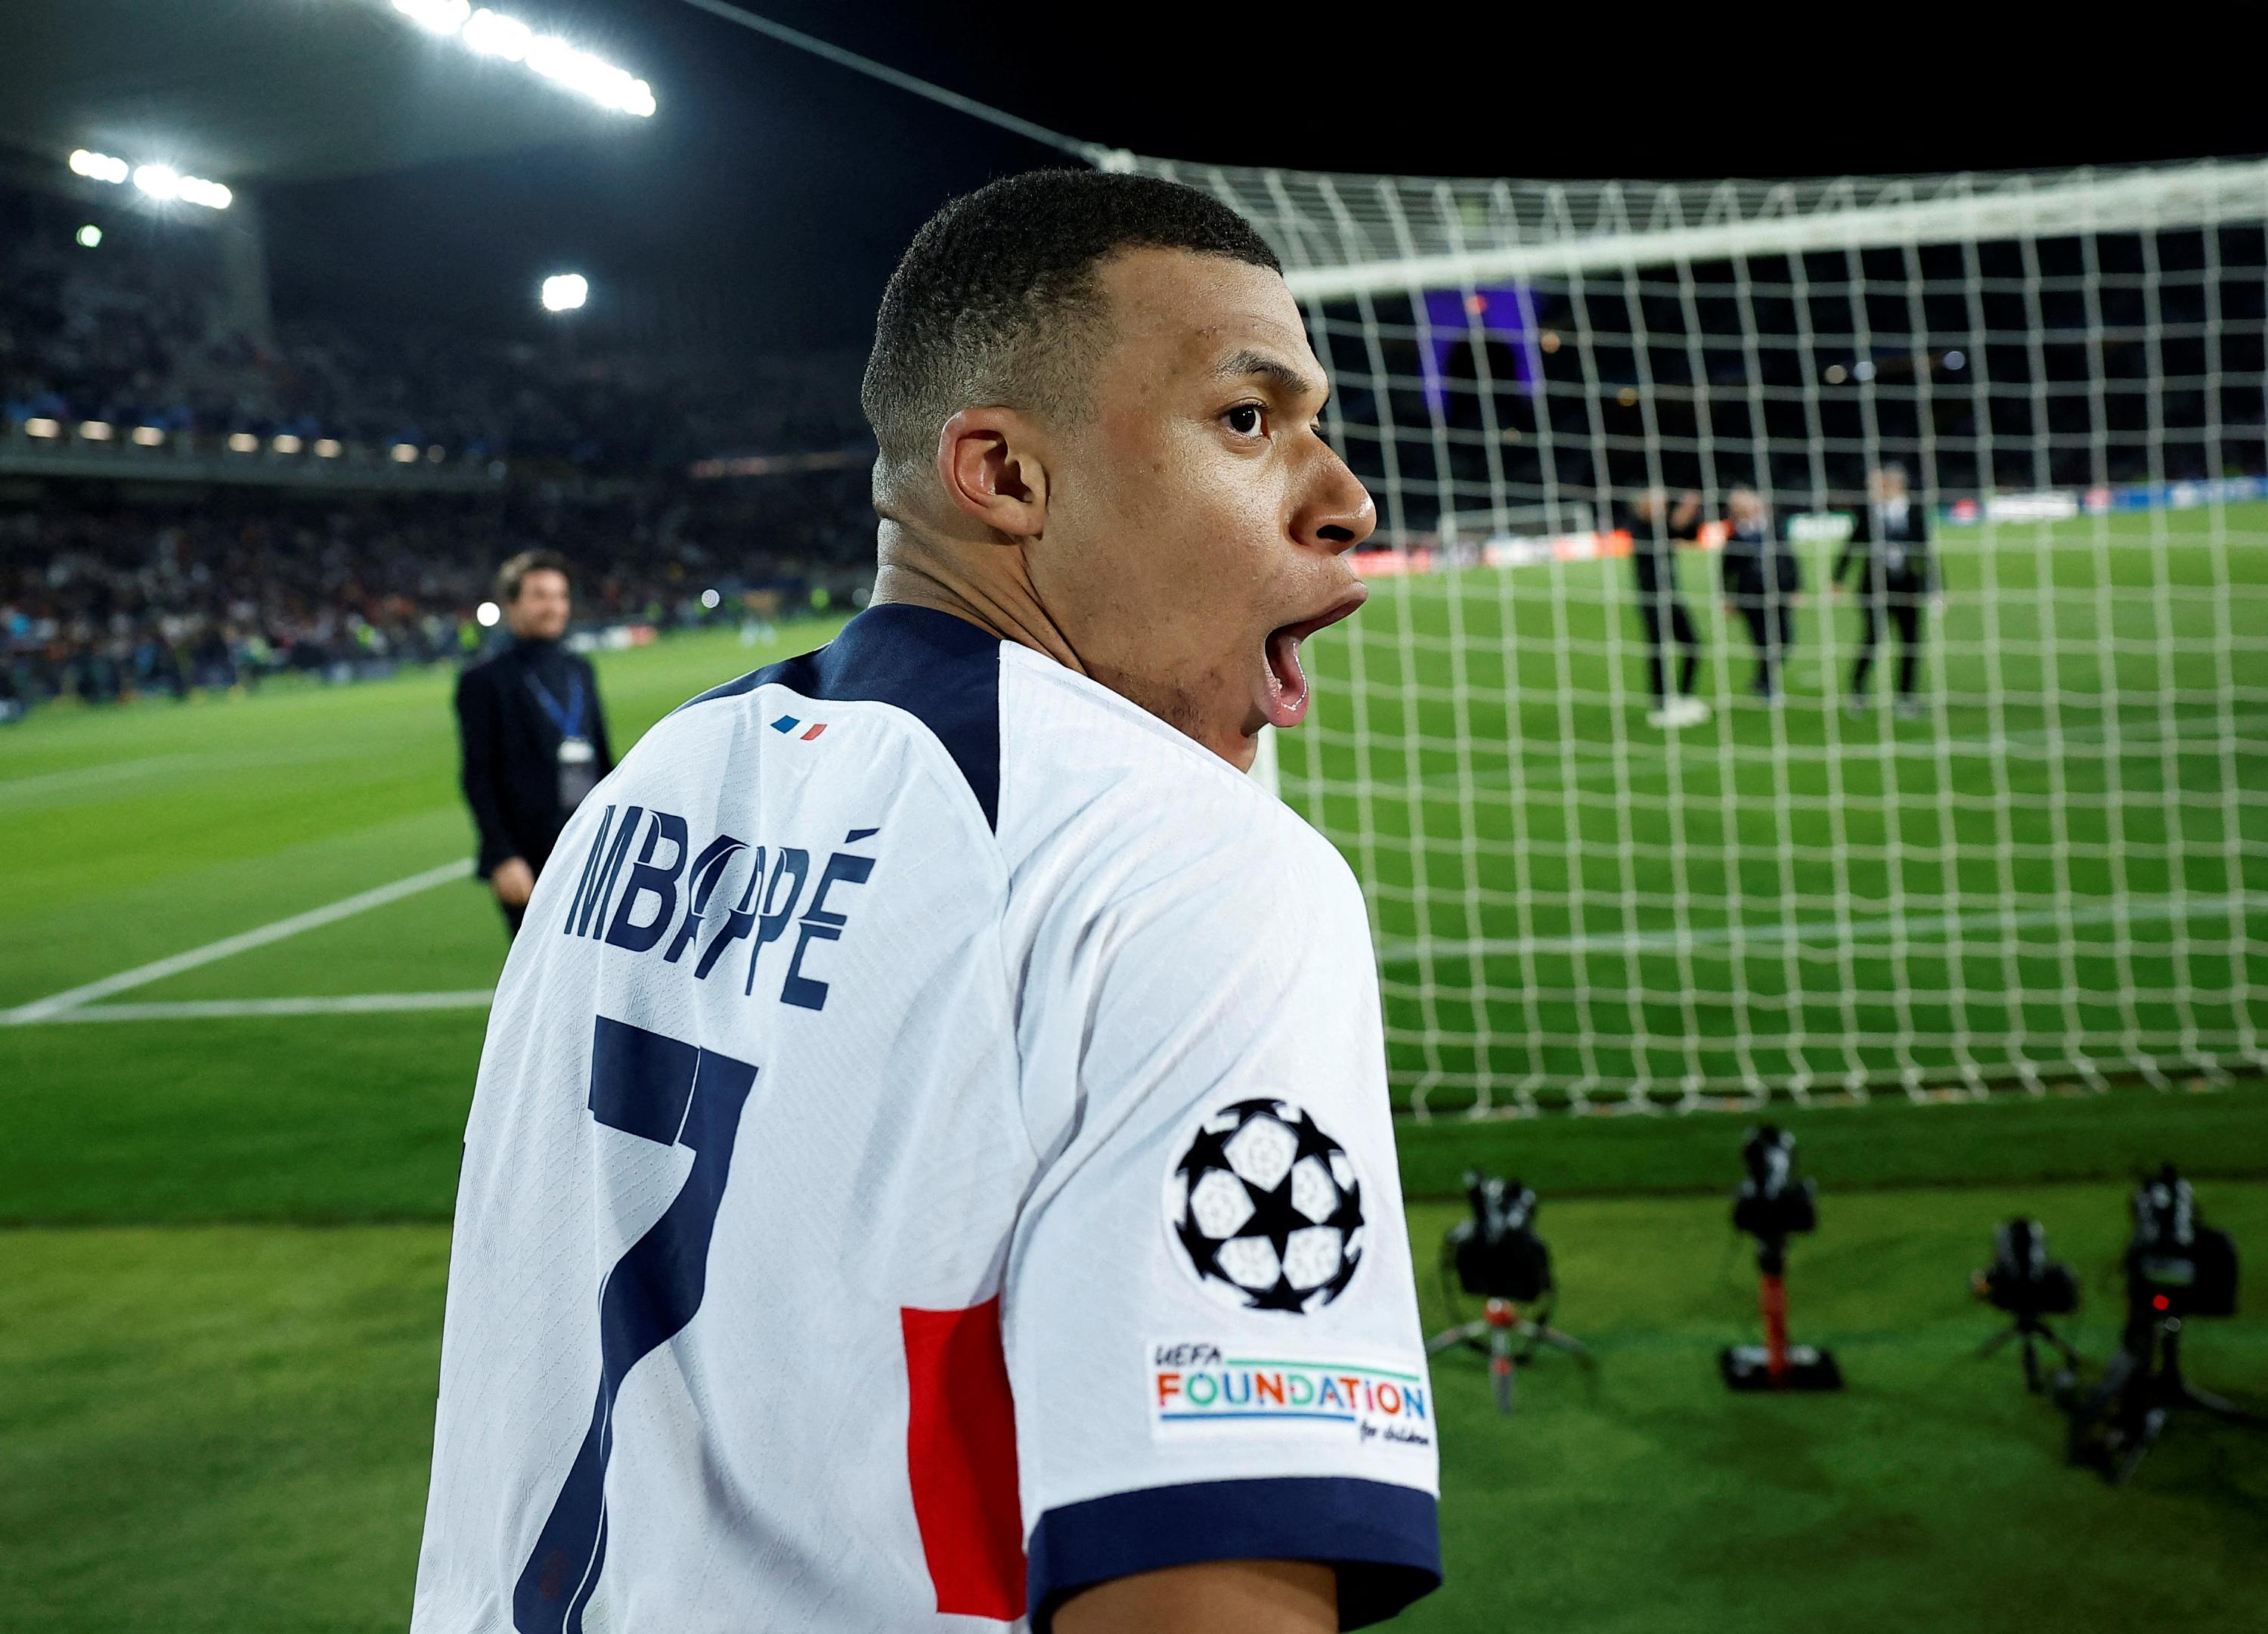 Real Madrid: what position will Mbappé play? The answer is known